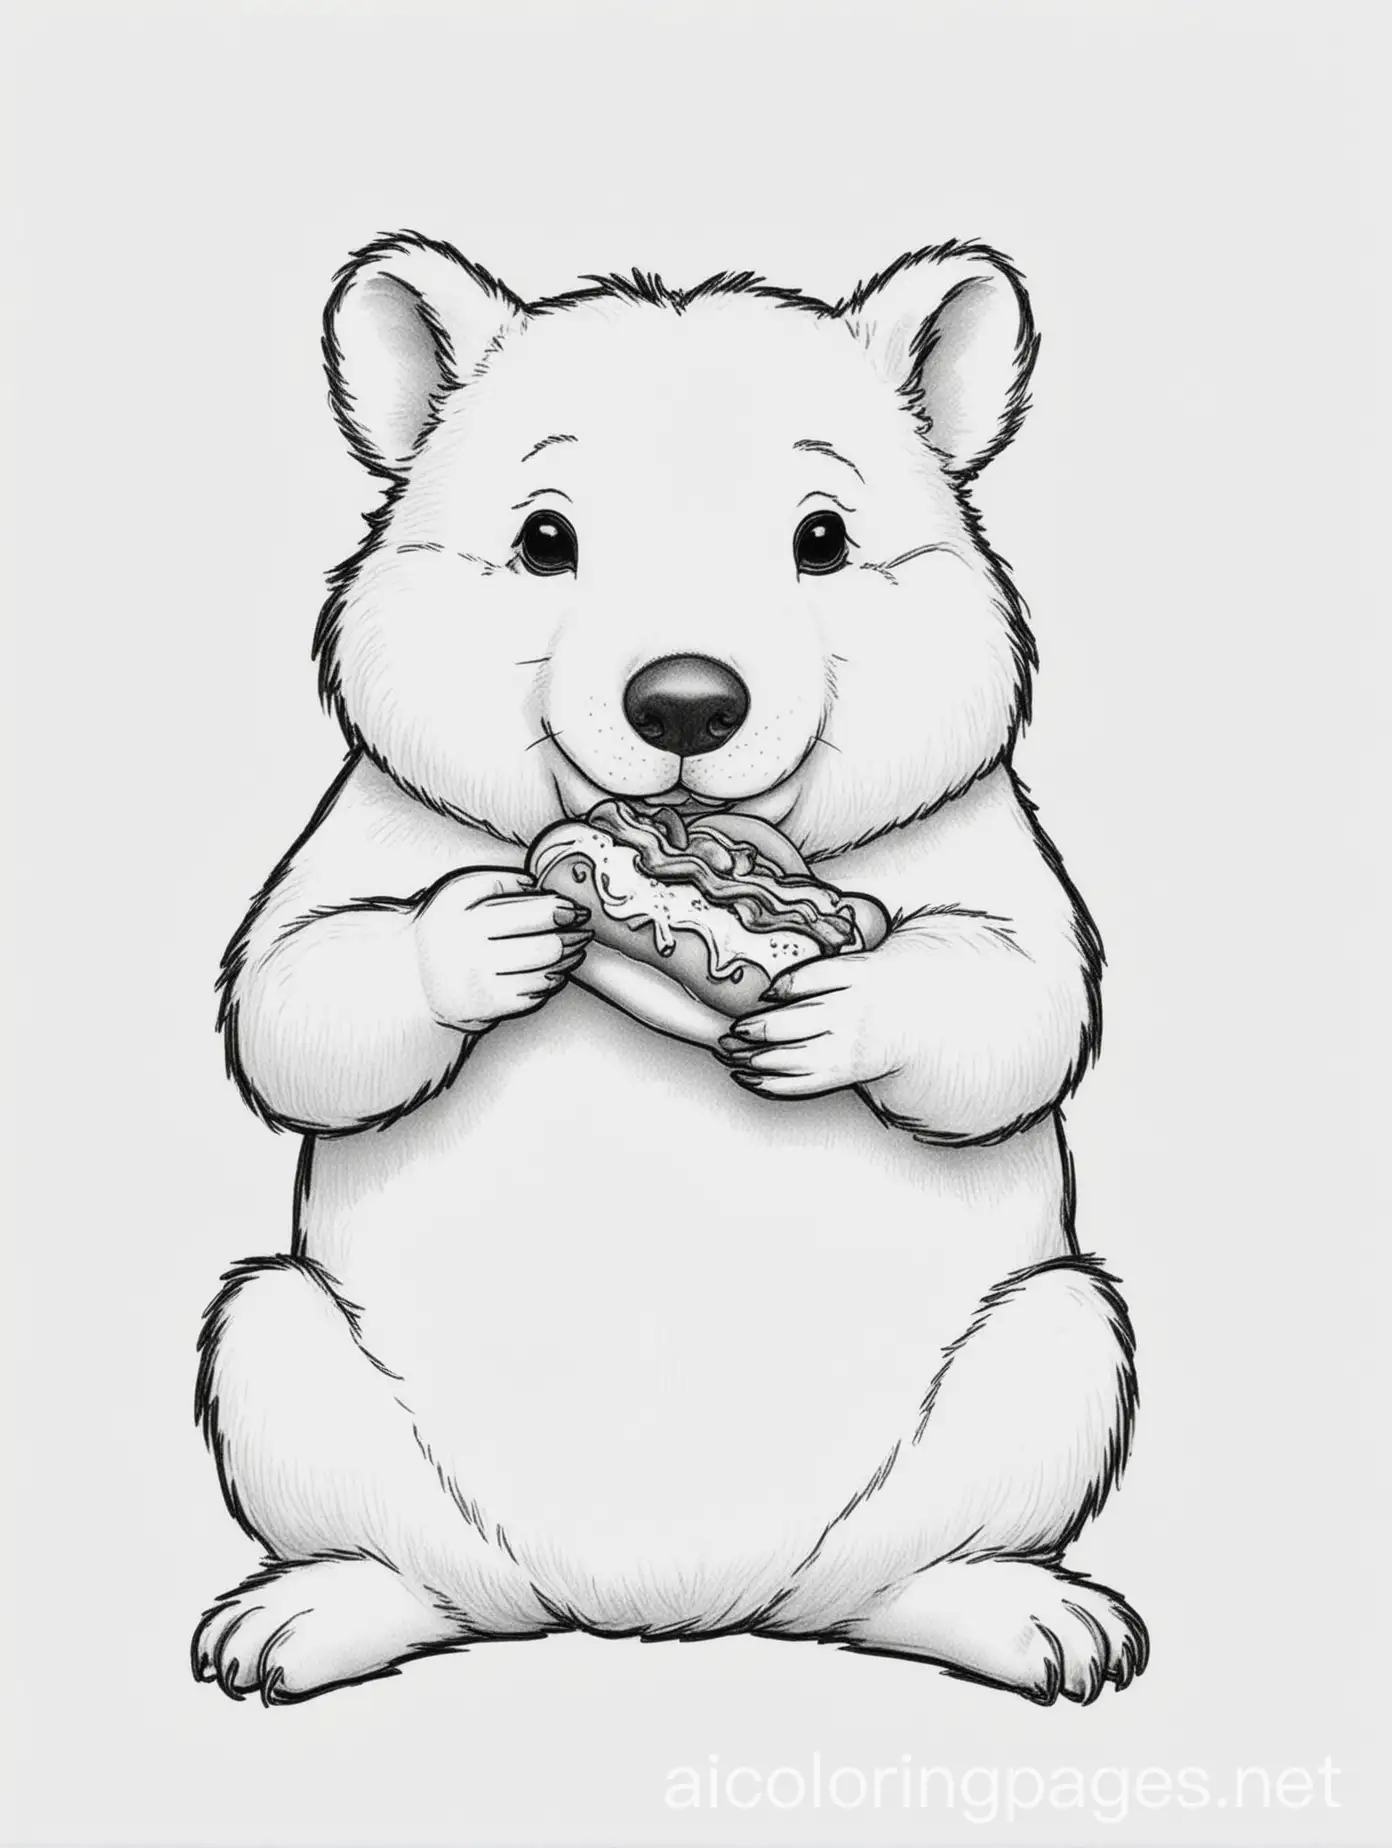 Wombat eating a hotdog, Coloring Page, black and white, line art, white background, Simplicity, Ample White Space. The background of the coloring page is plain white to make it easy for young children to color within the lines. The outlines of all the subjects are easy to distinguish, making it simple for kids to color without too much difficulty